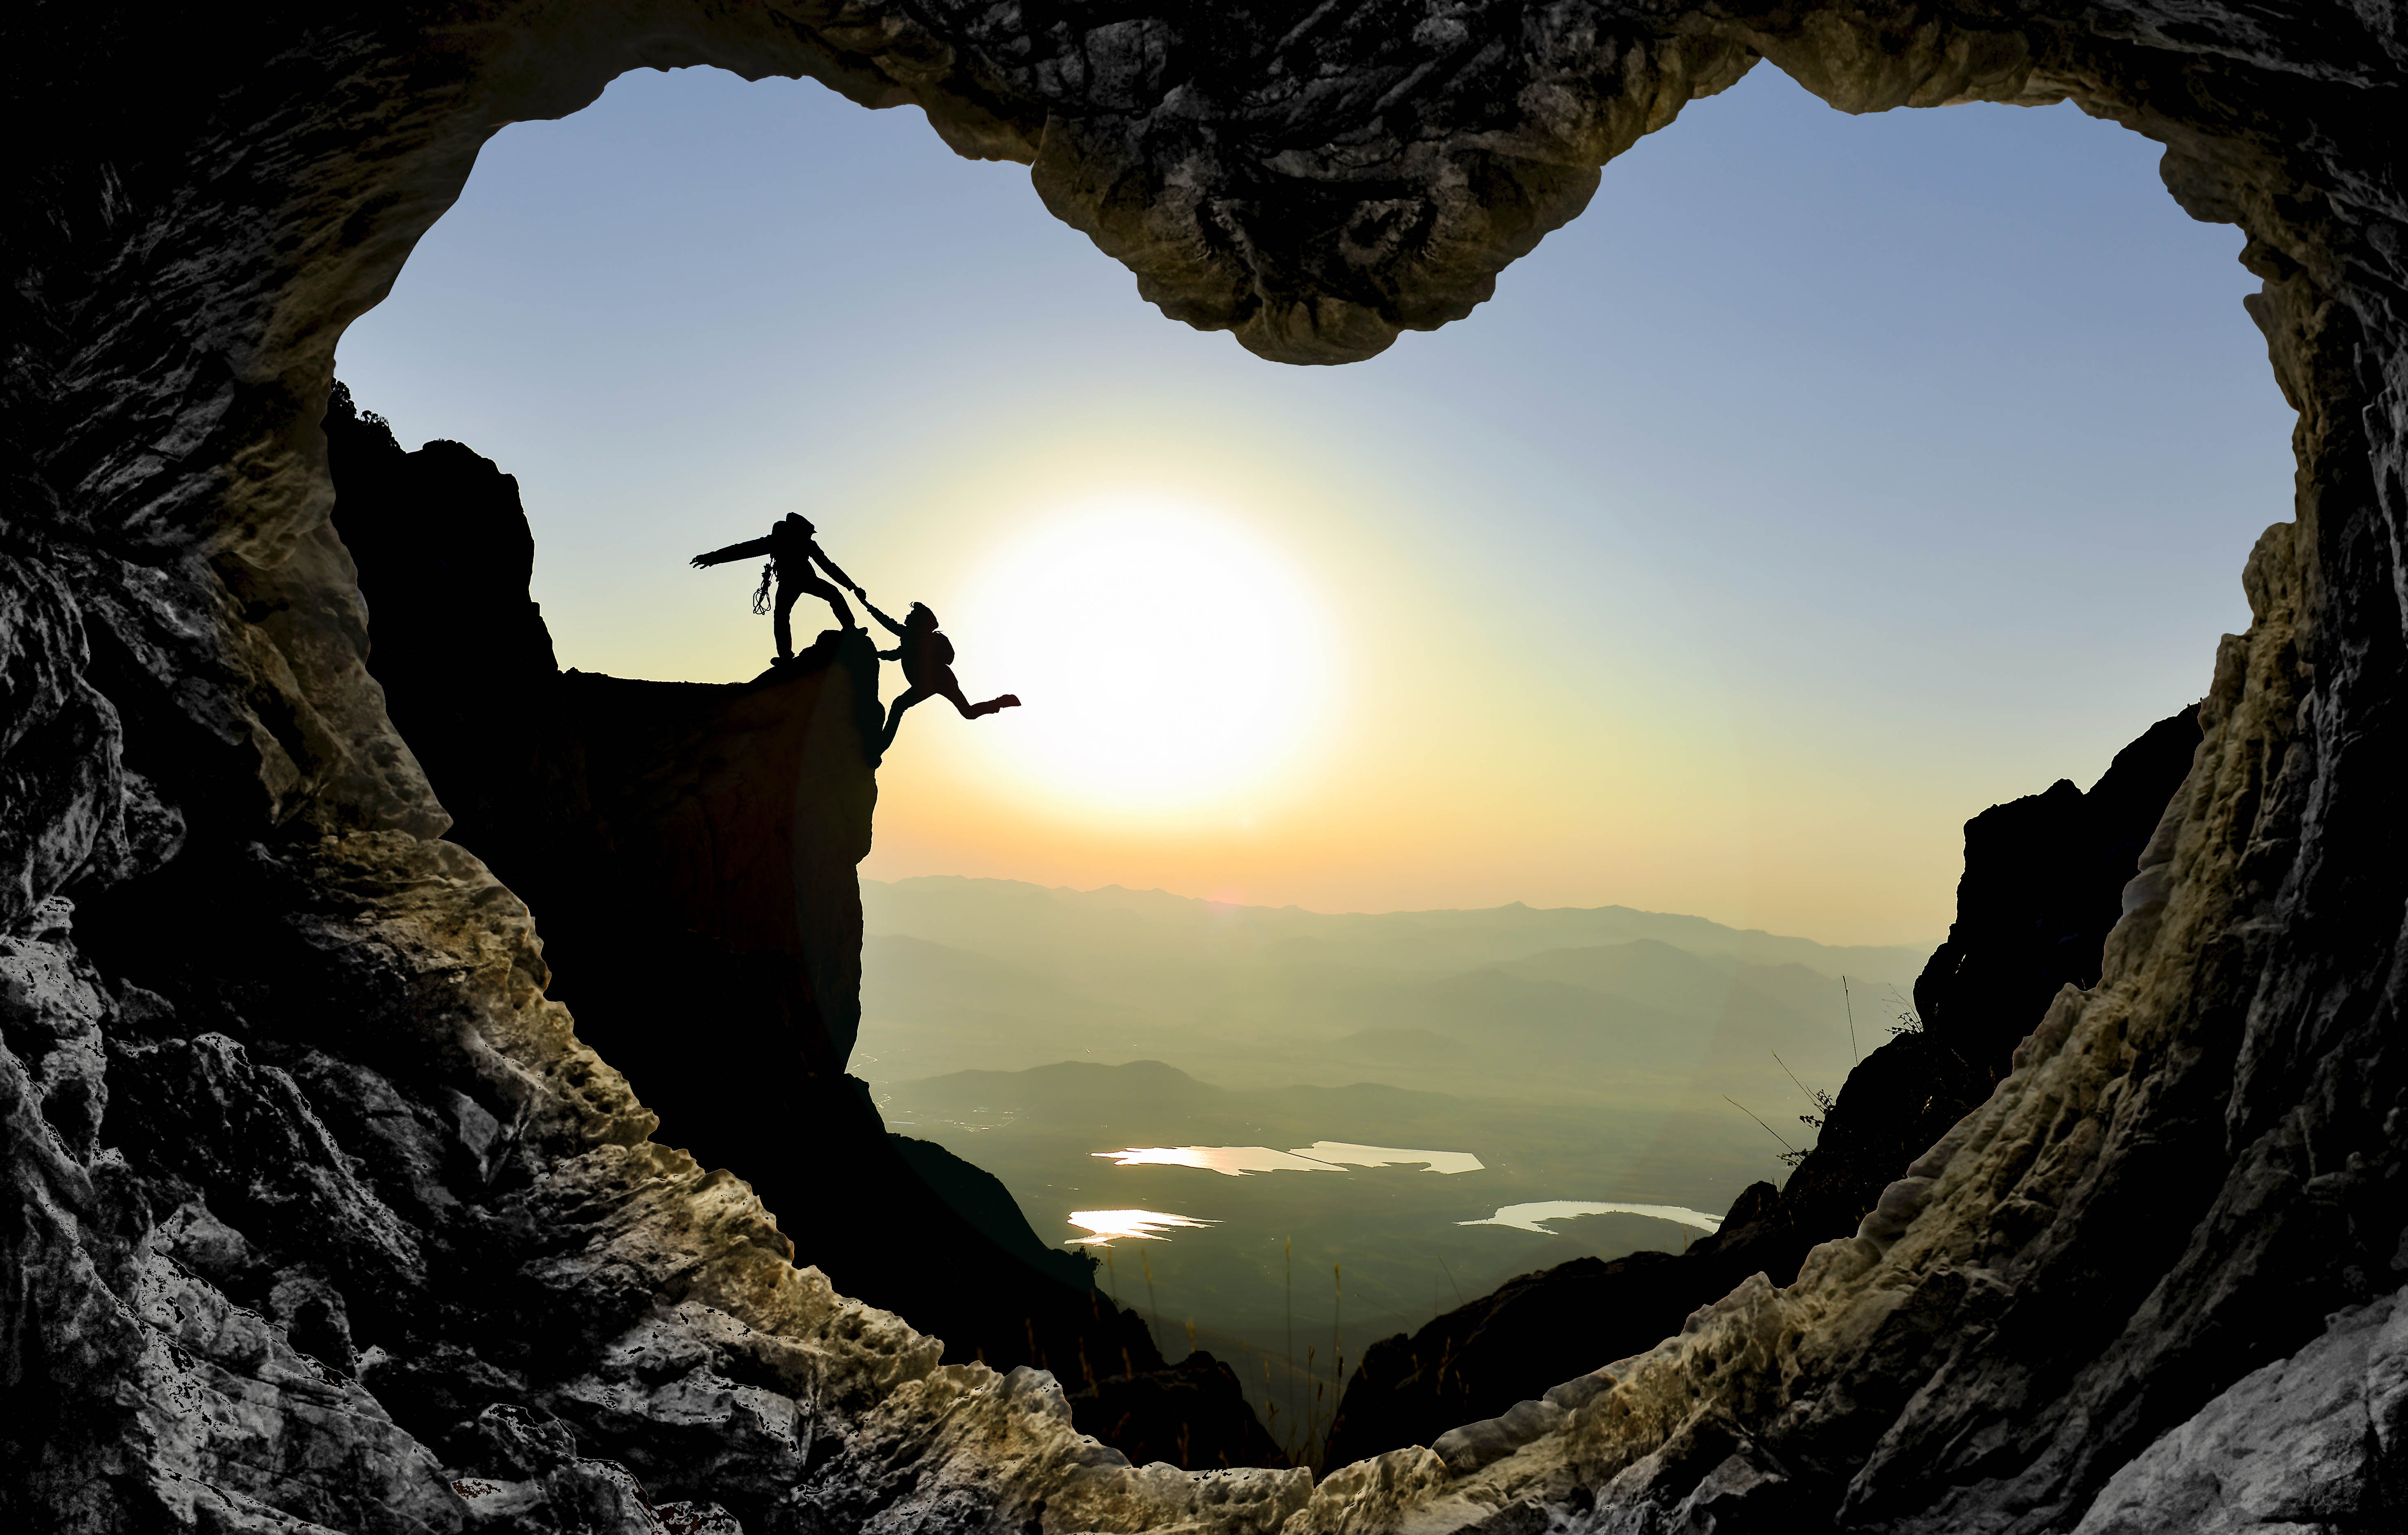 Cave in the shape of a heart, with the silhouette of two people - one helping the other up the cliff - in the twilight